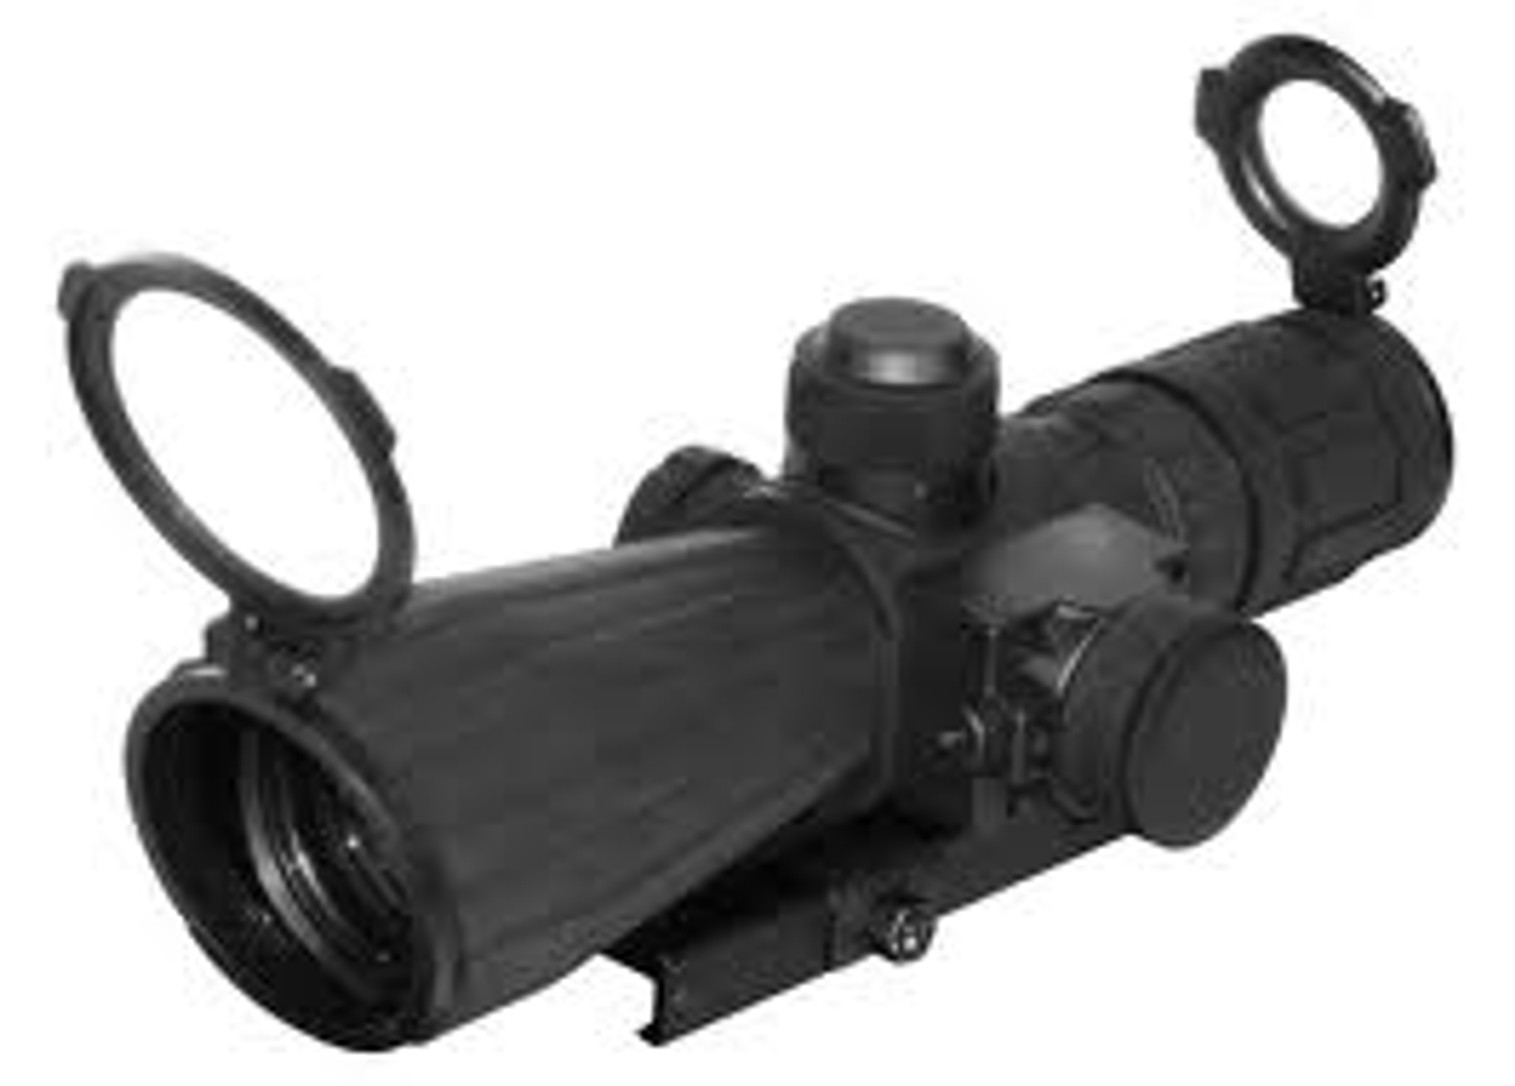 NcStar SRT Series 4x32 Compact P4 Sniper Scope w/Red Laser